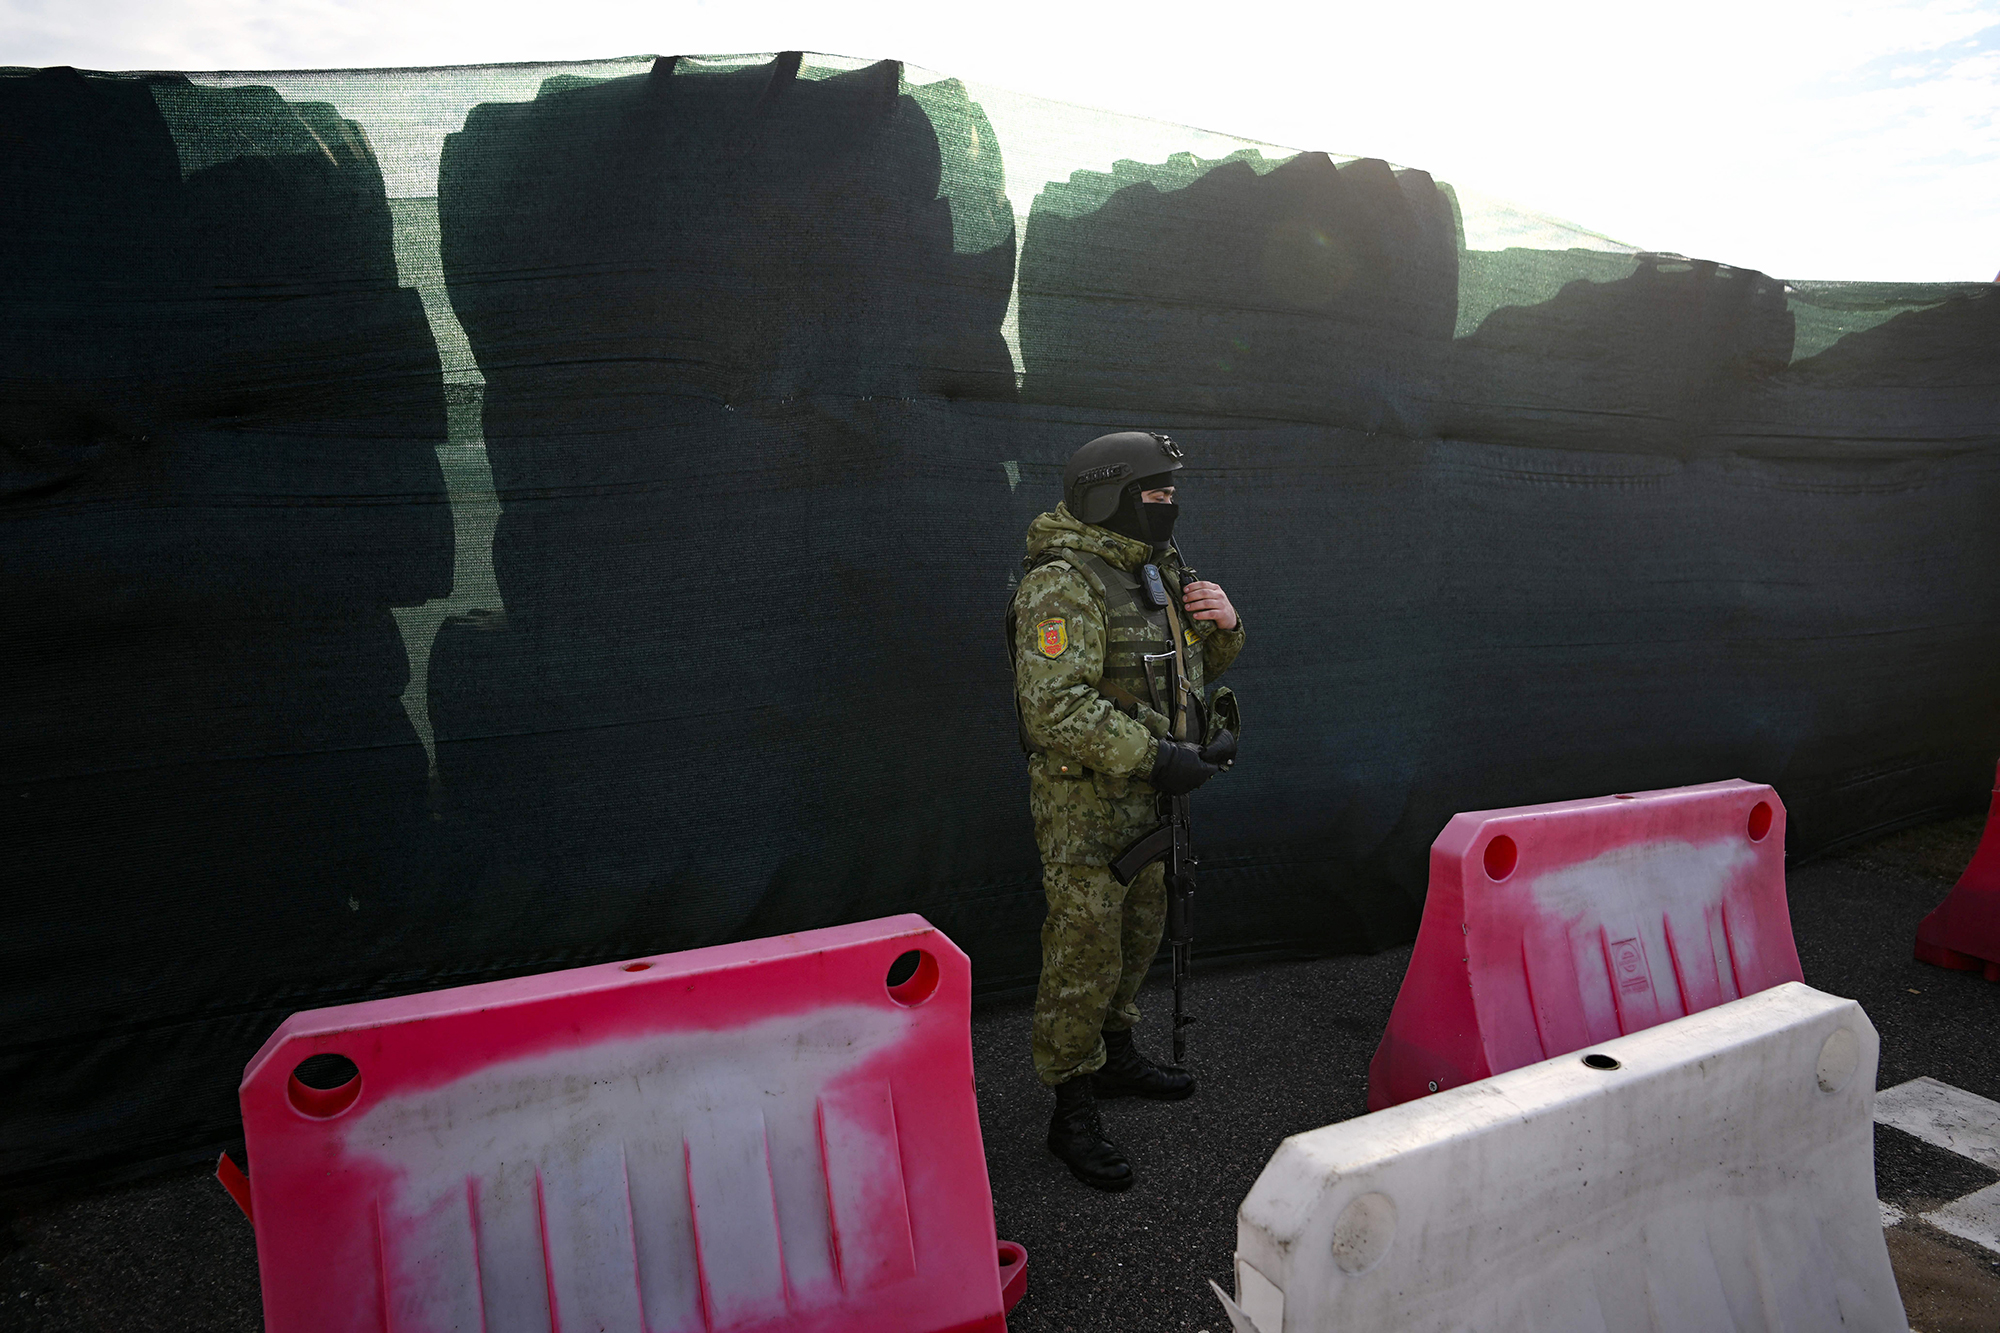 A Belarusian border guard keeps watch standing by a barricade made of truck tires at the Dyvin border crossing point between Belarus and Ukraine in the Brest region on February 15.